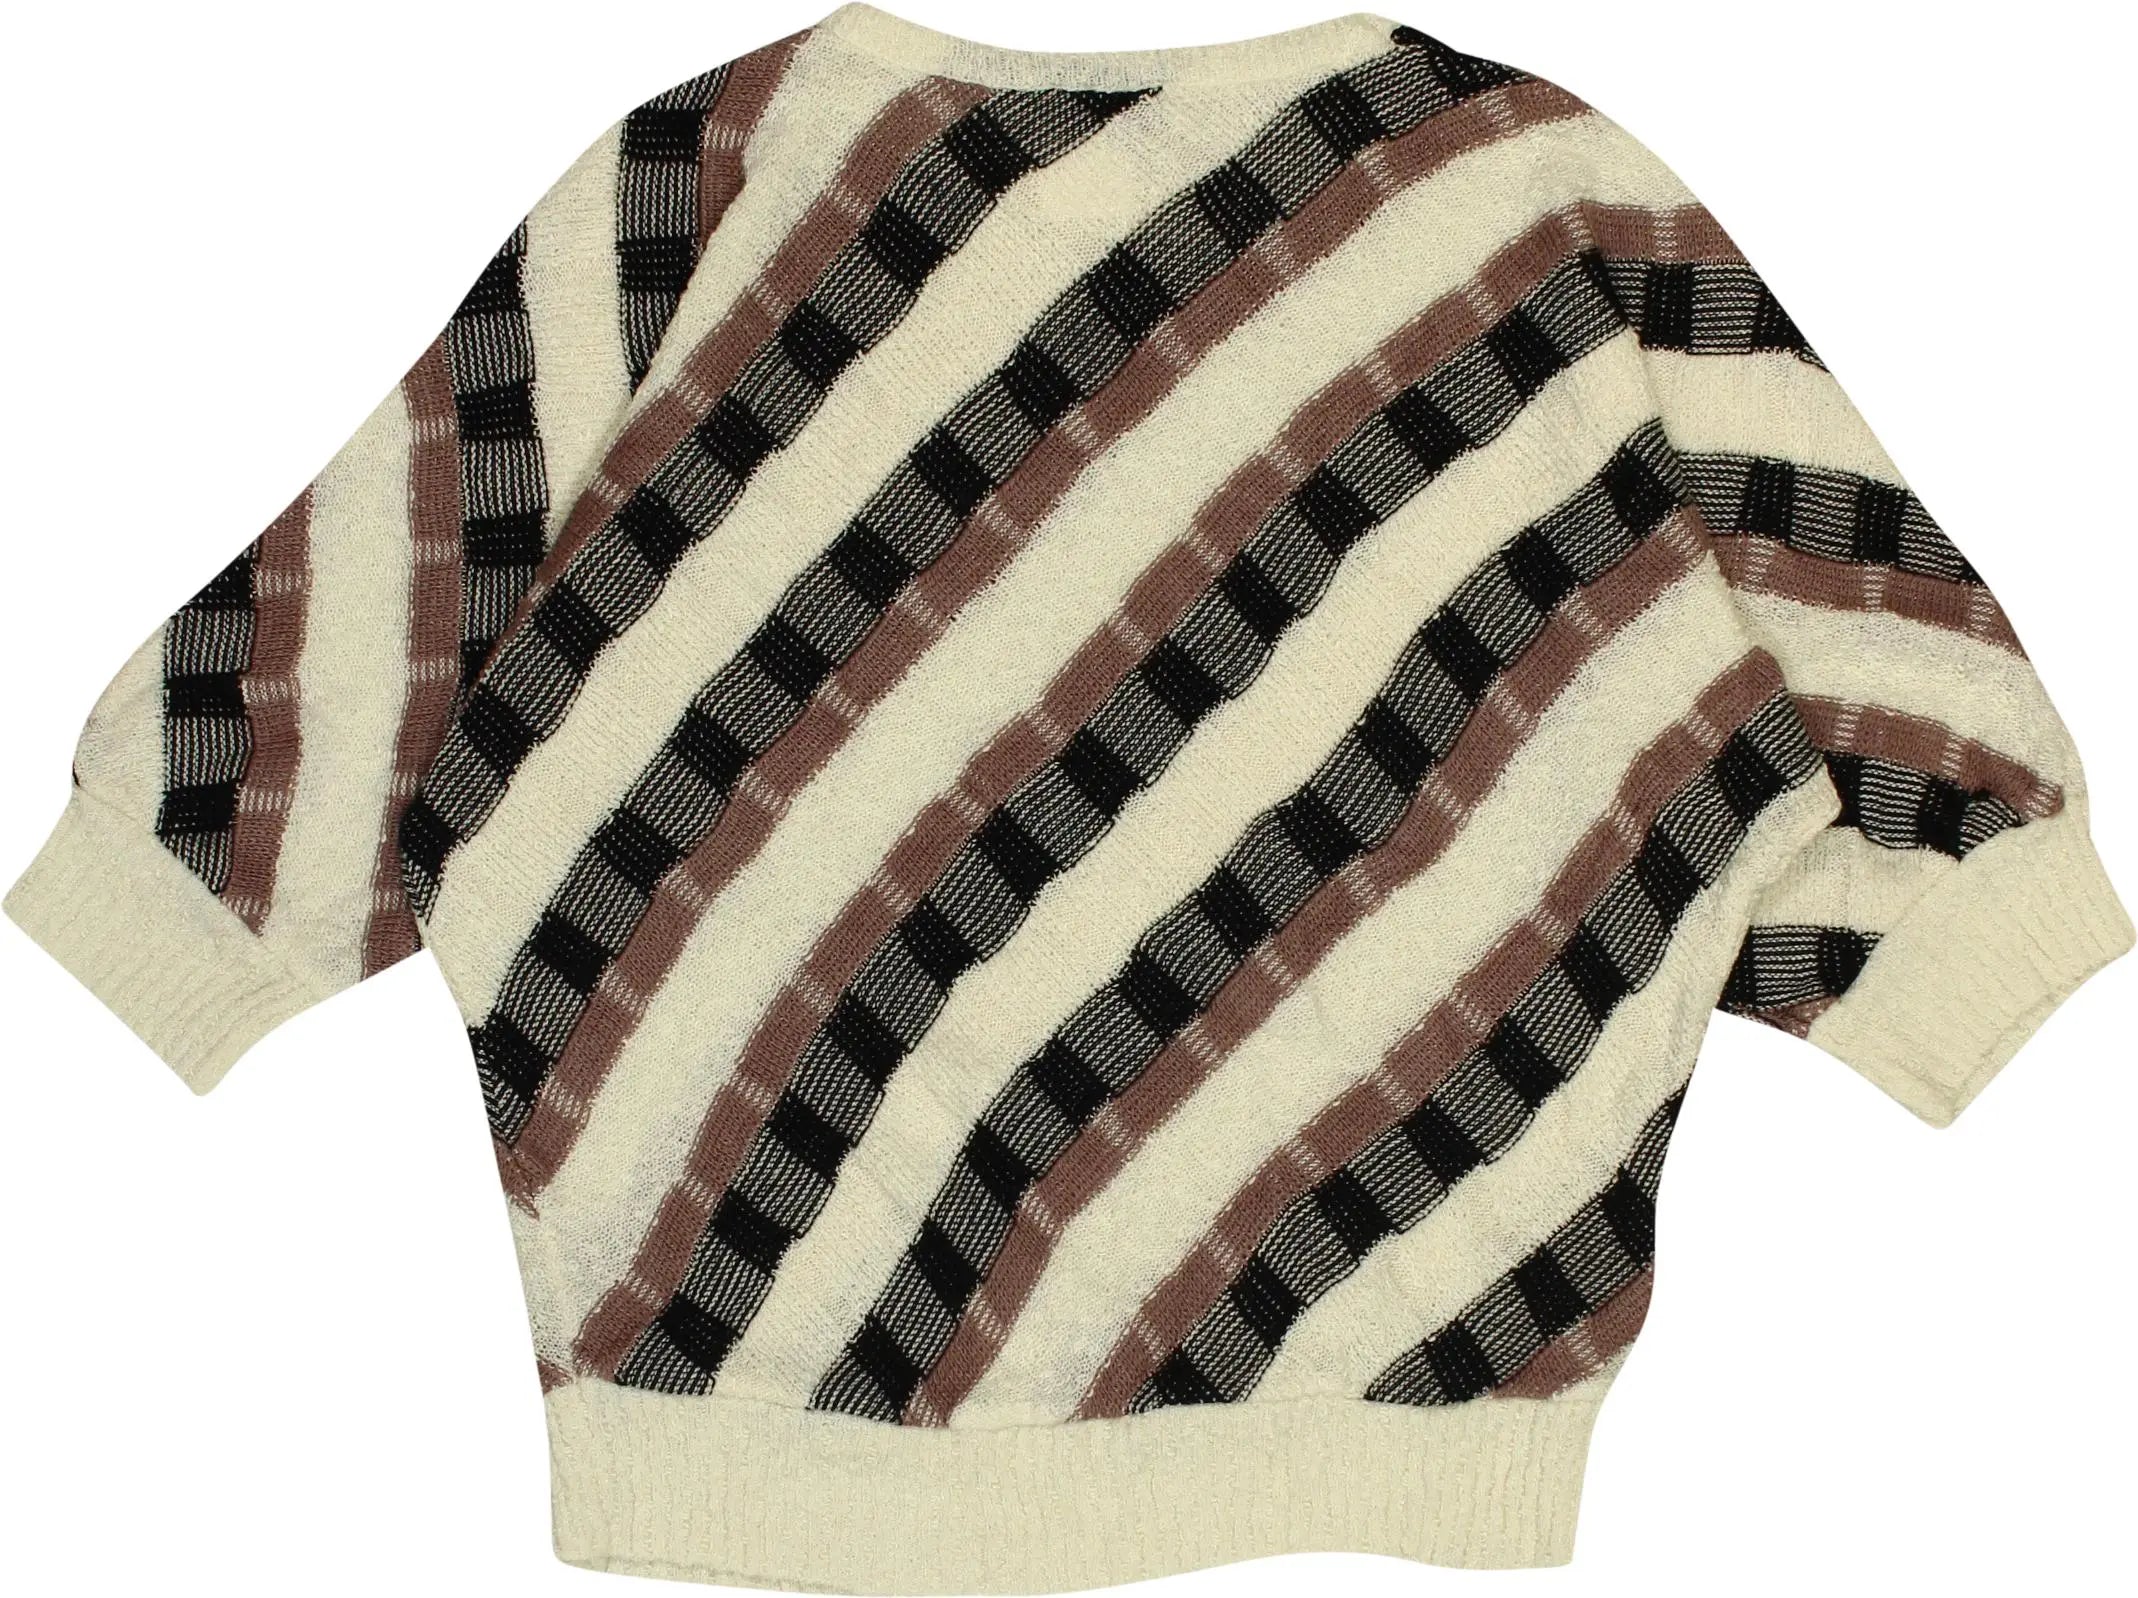 D'Allairds - 80s Jumper- ThriftTale.com - Vintage and second handclothing